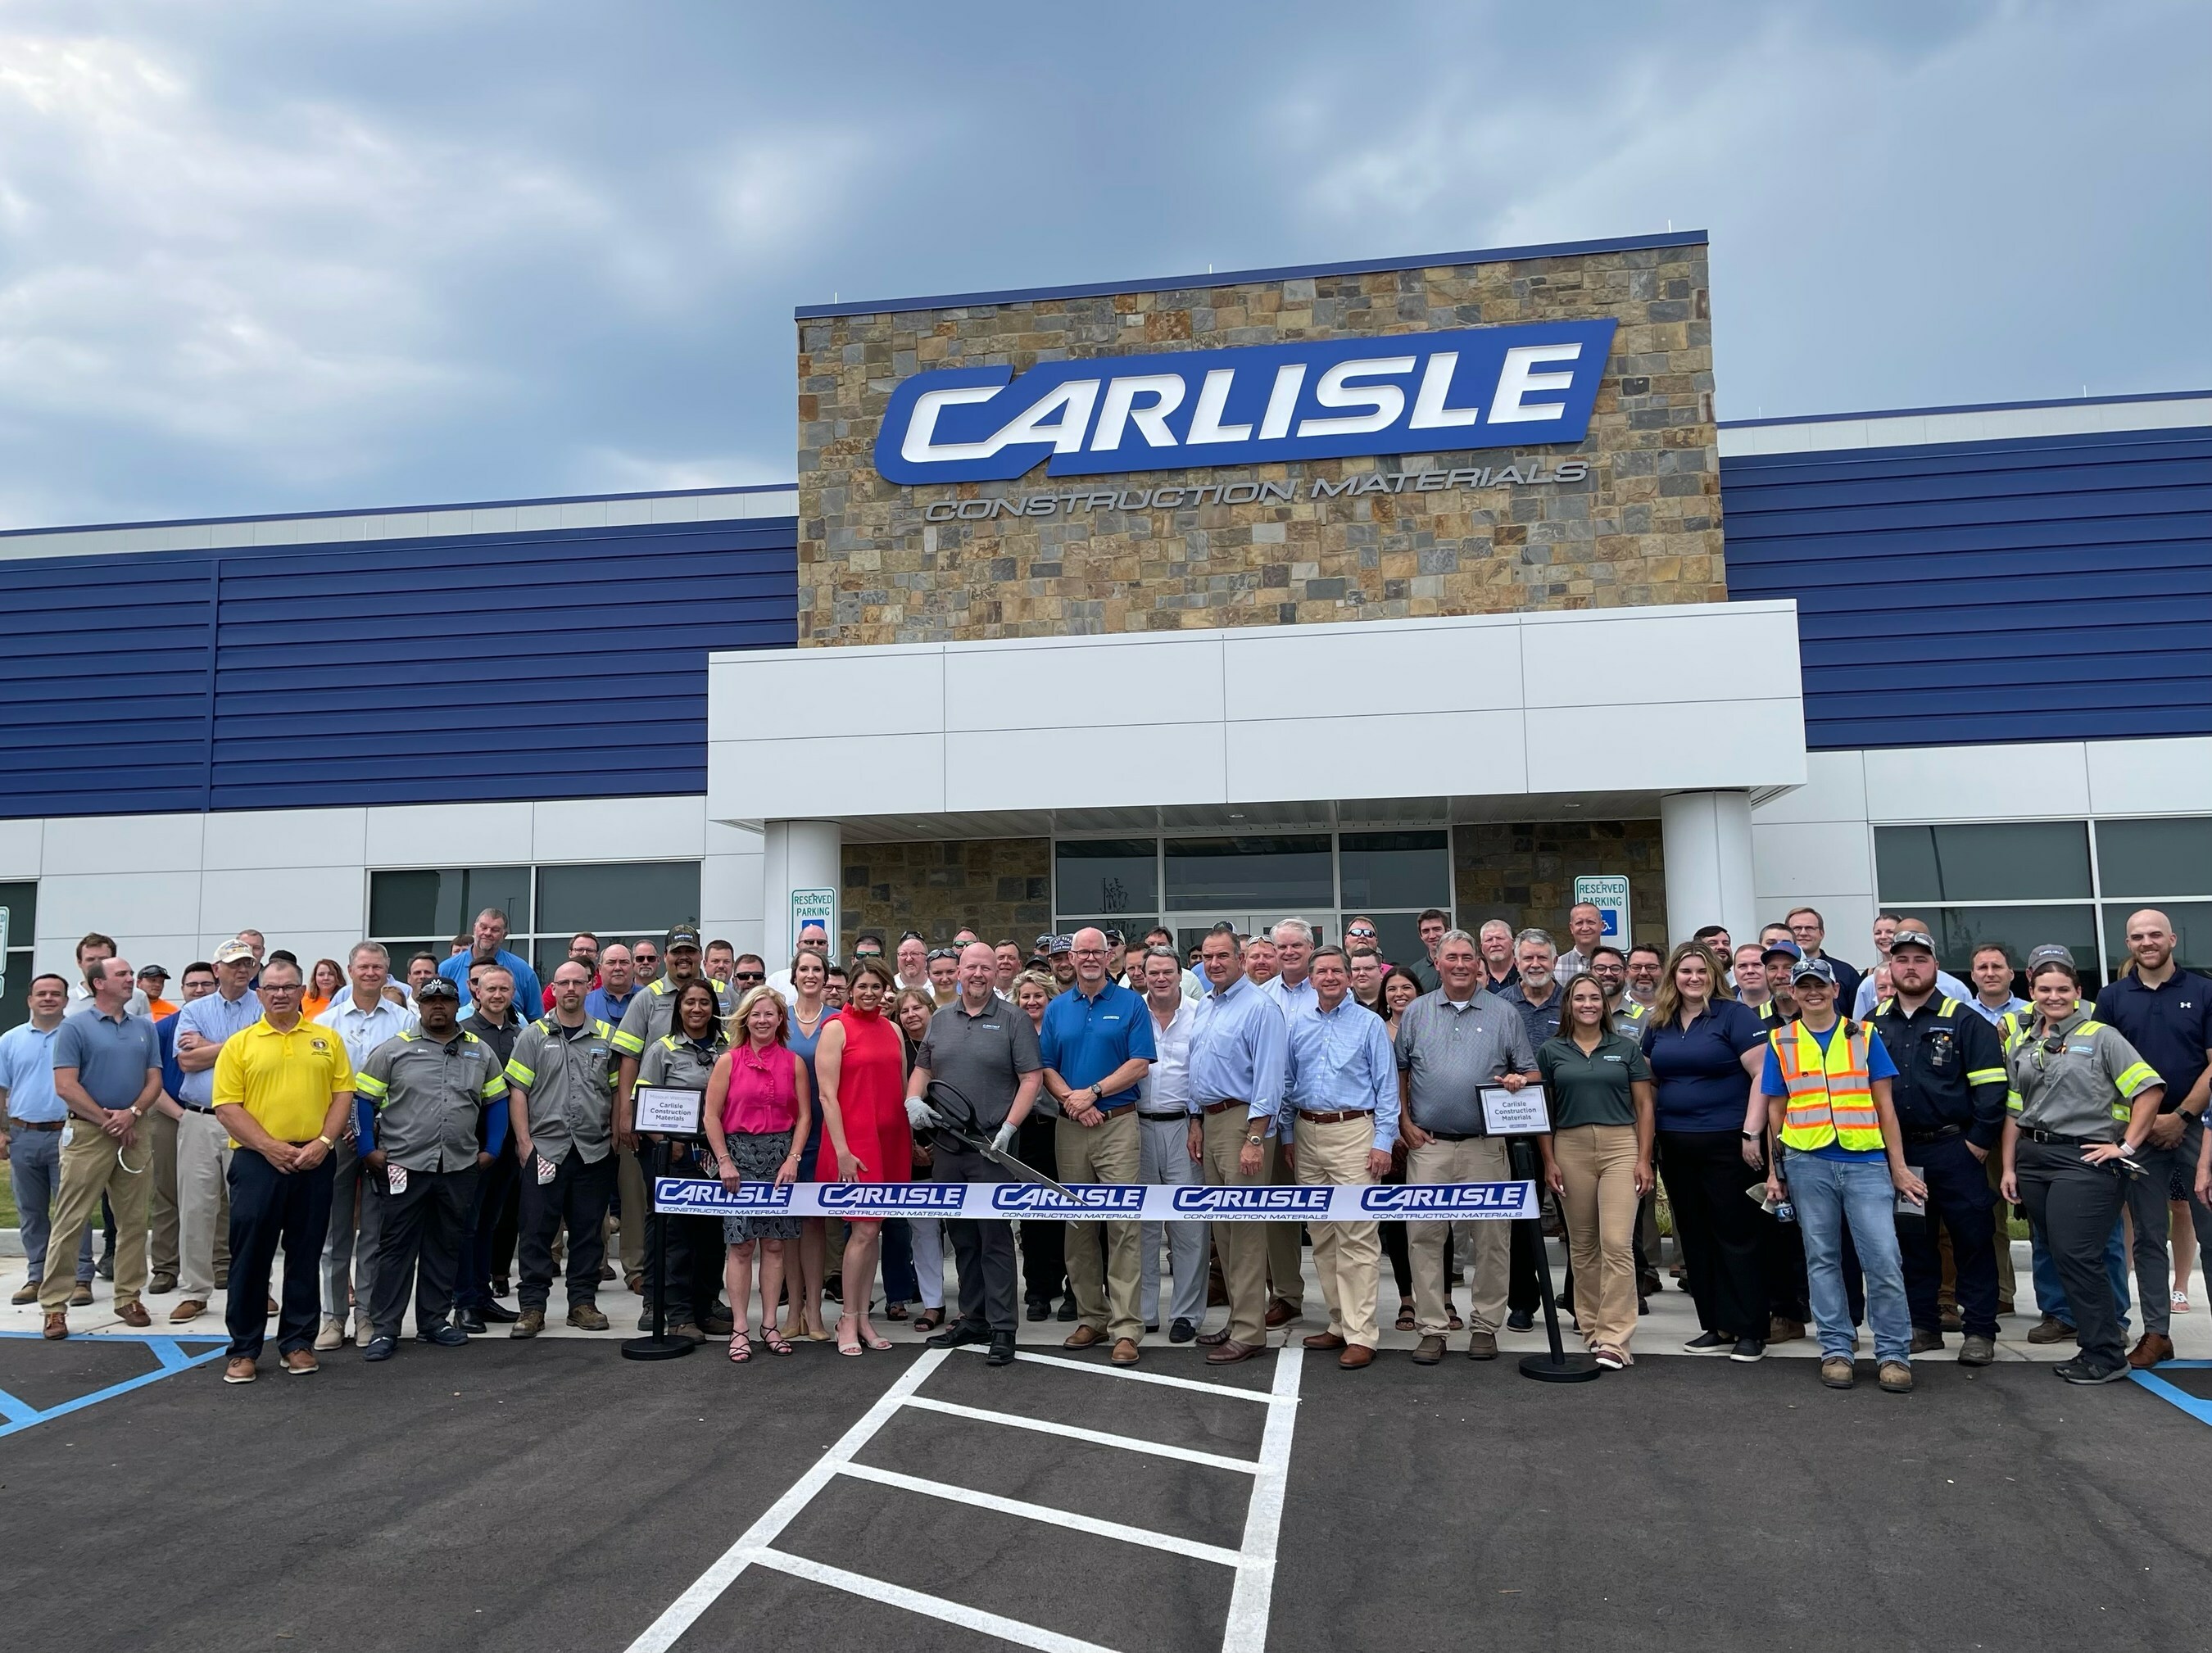 Carlisle Construction Materials Opens New Production and Manufacturing Facility in Southern Missouri